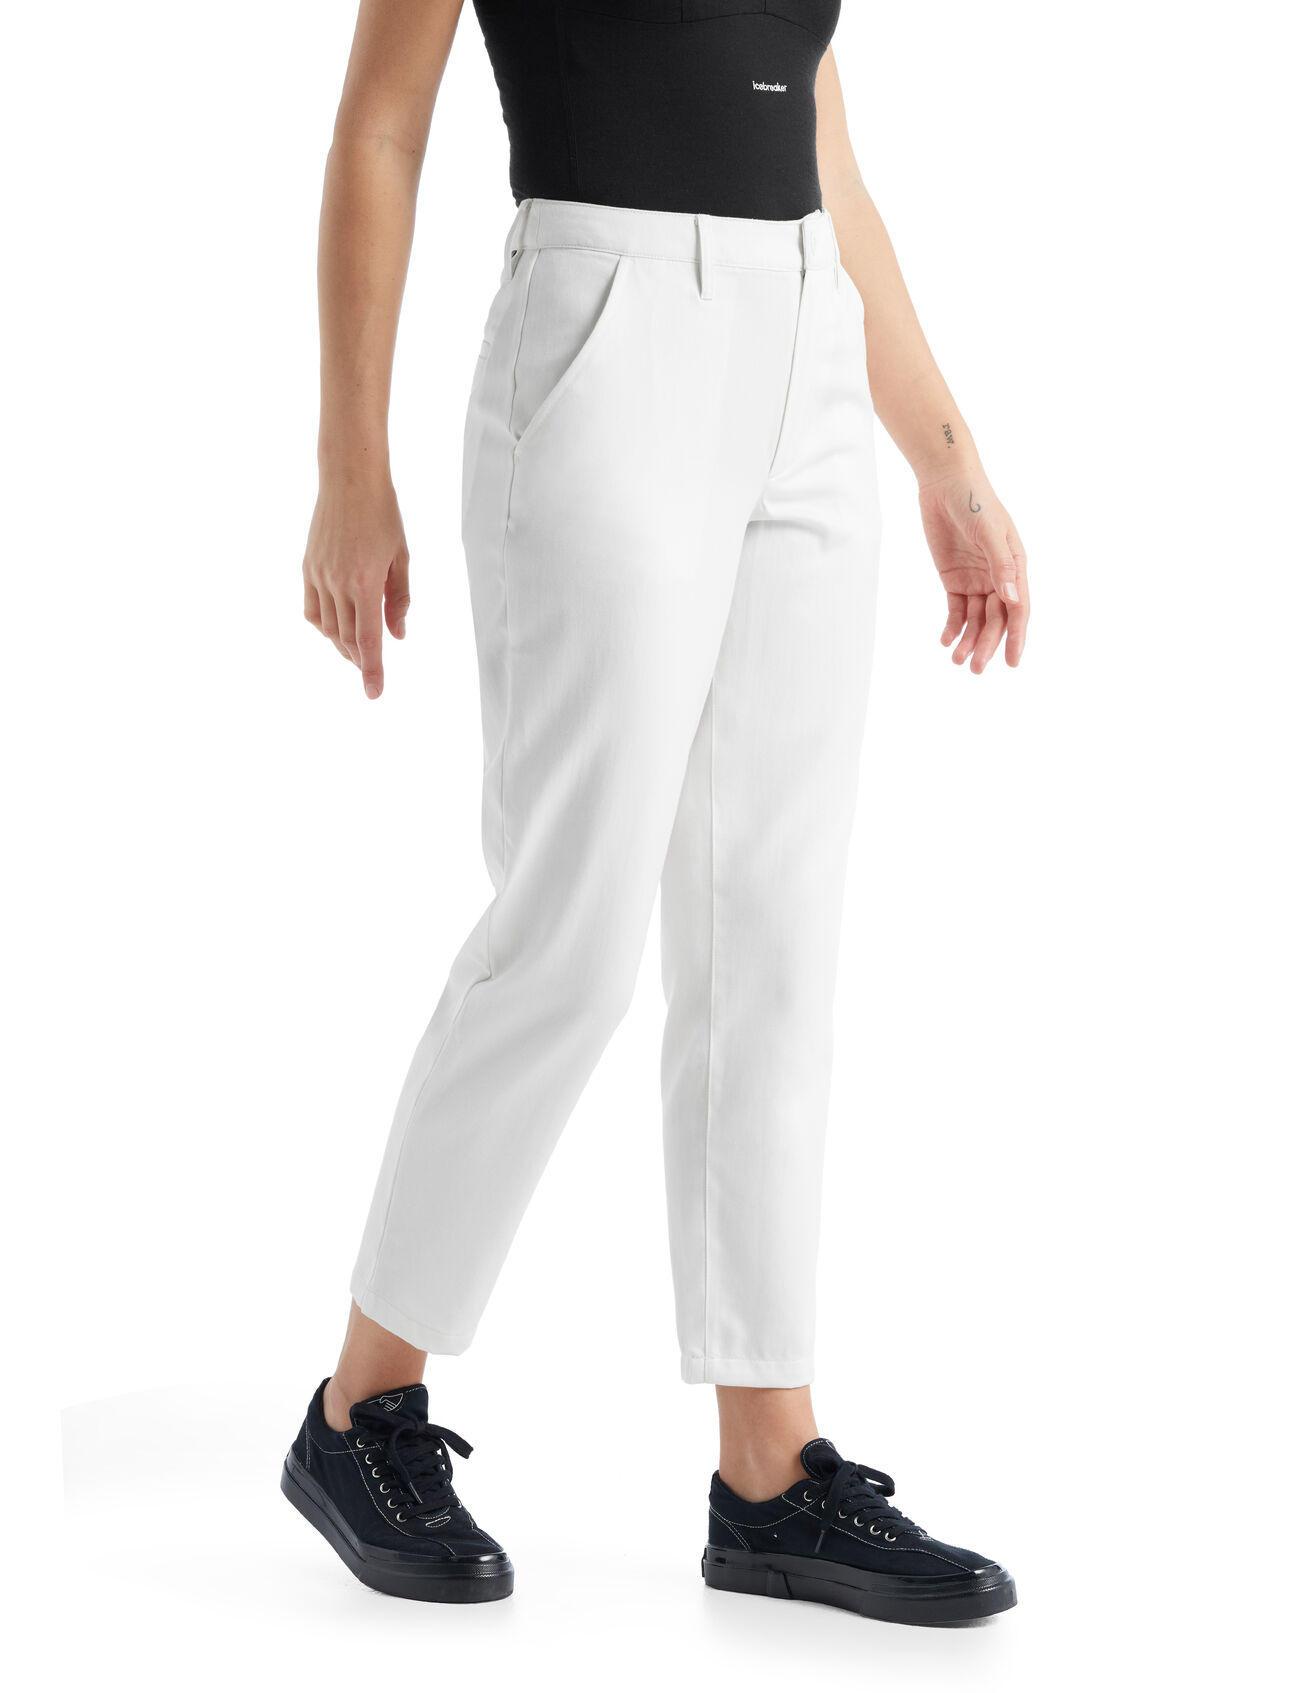 Womens Merino Berlin Pants  A classic, versatile chino pant, the Berlin Pants feature a unique and sustainable blend of all natural merino wool and organic cotton.